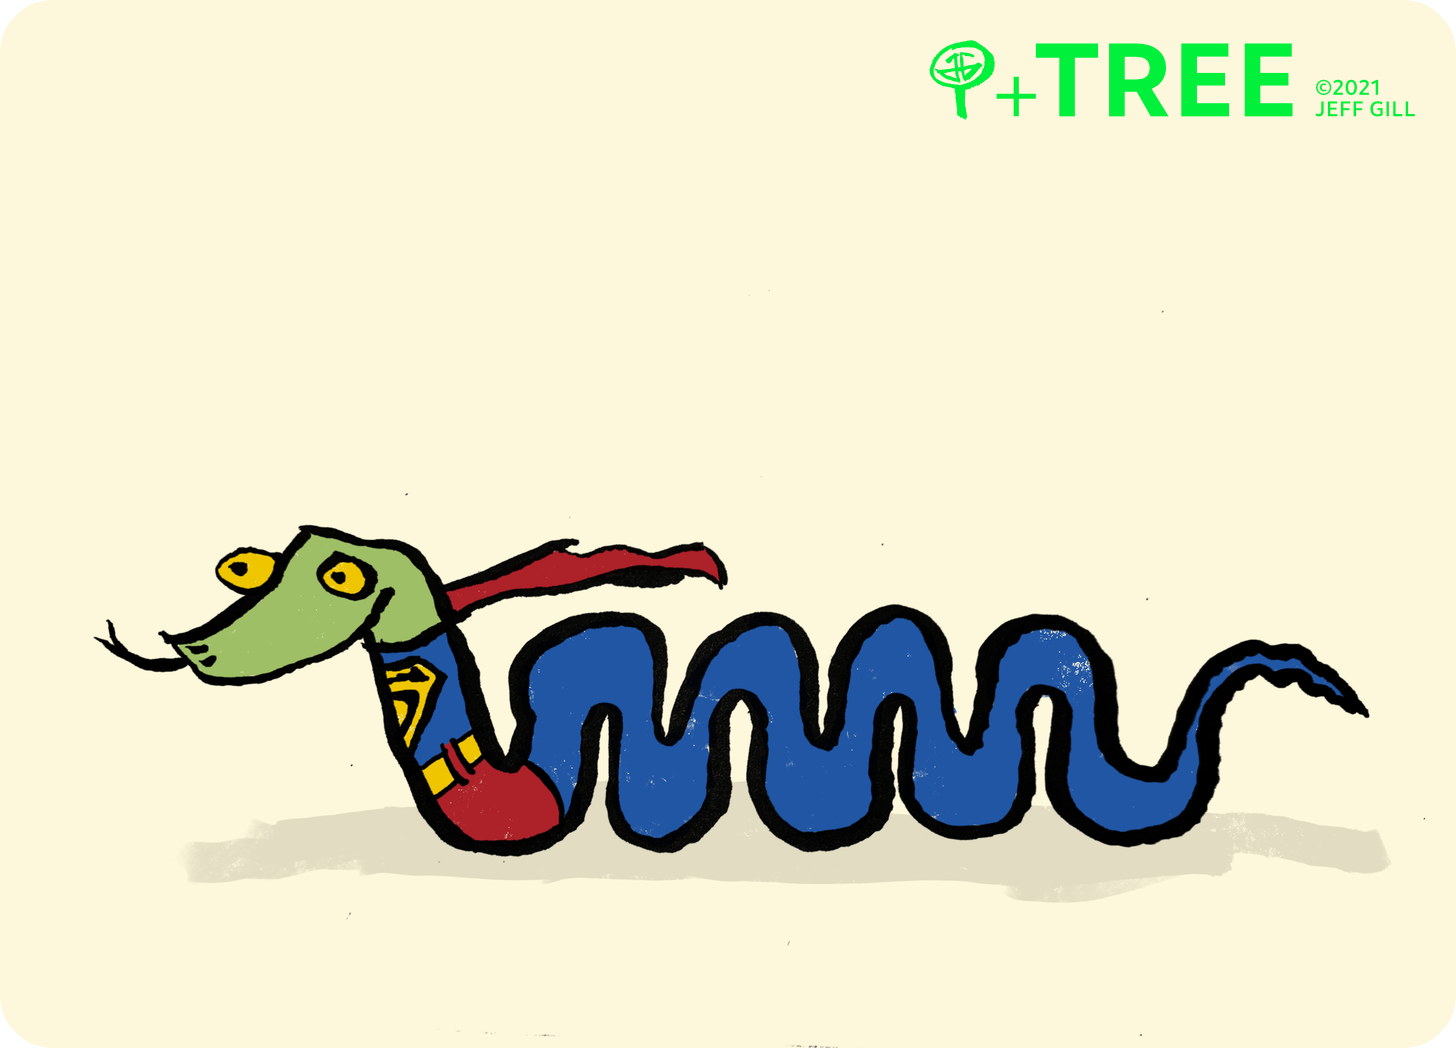 Illustration of a green snake in a Superman costume posing in a wavy stance